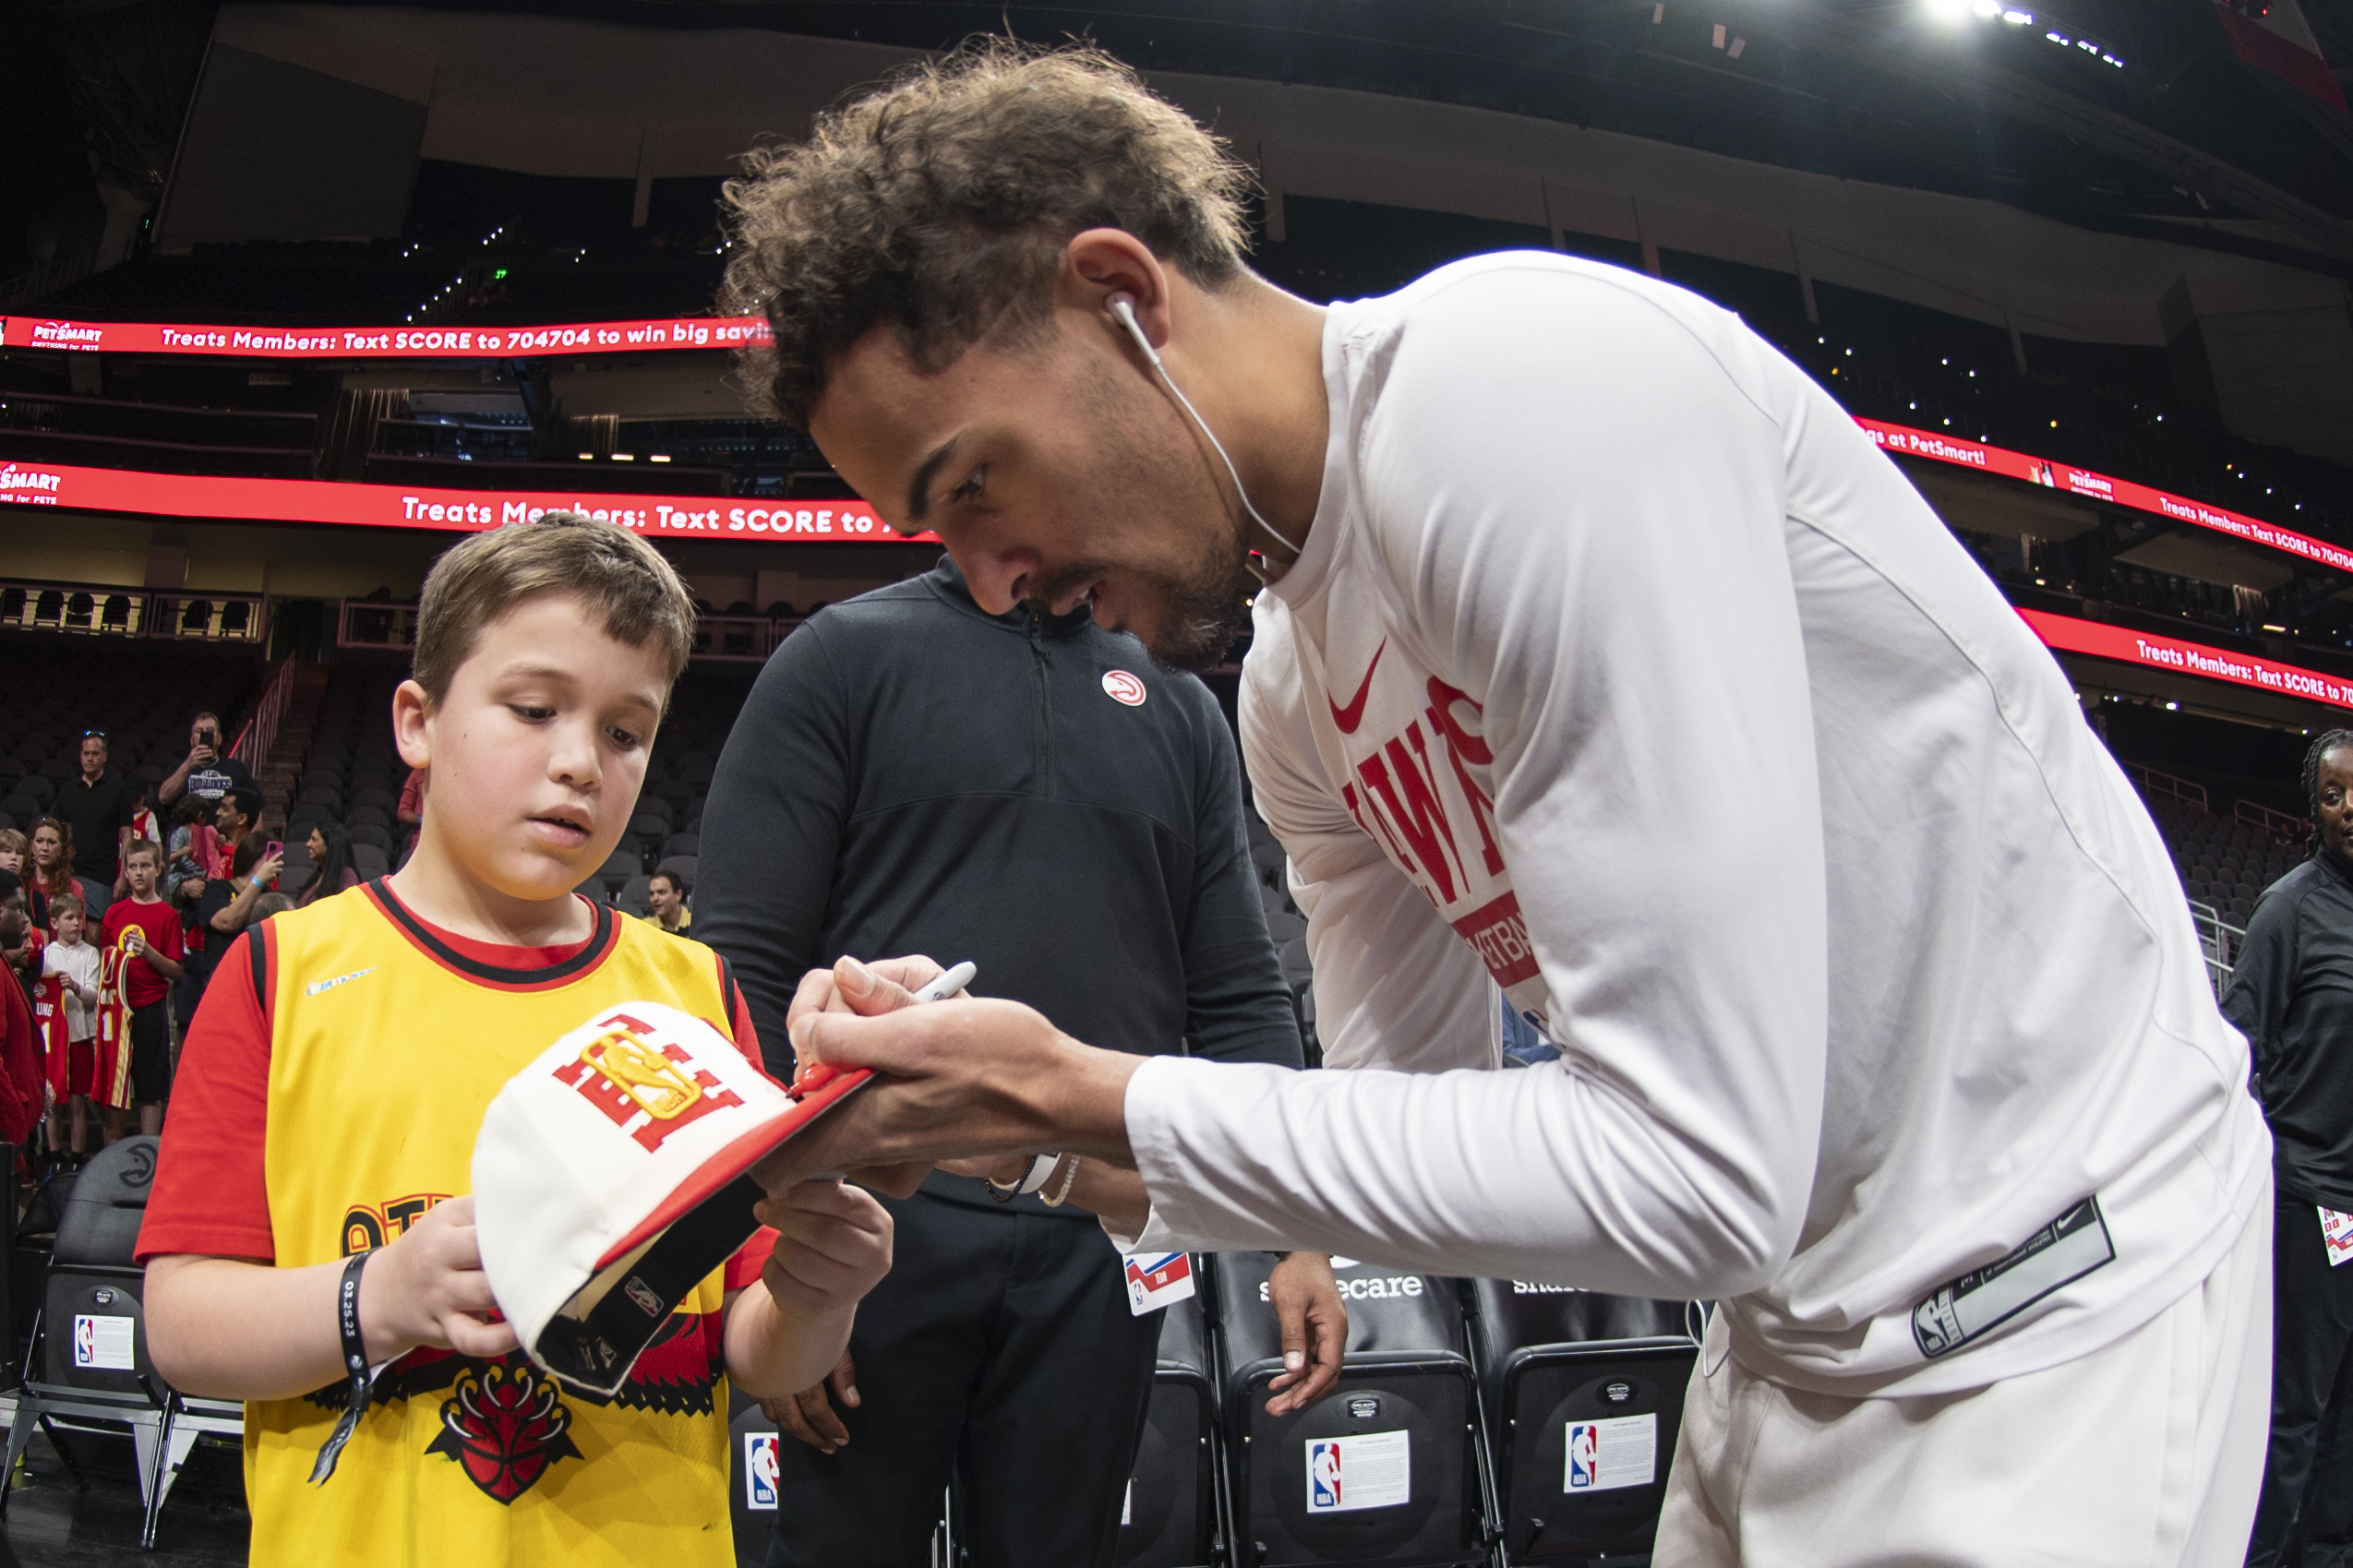 Scottie Pippen asks Trae Young how long he'll be able to handle losing